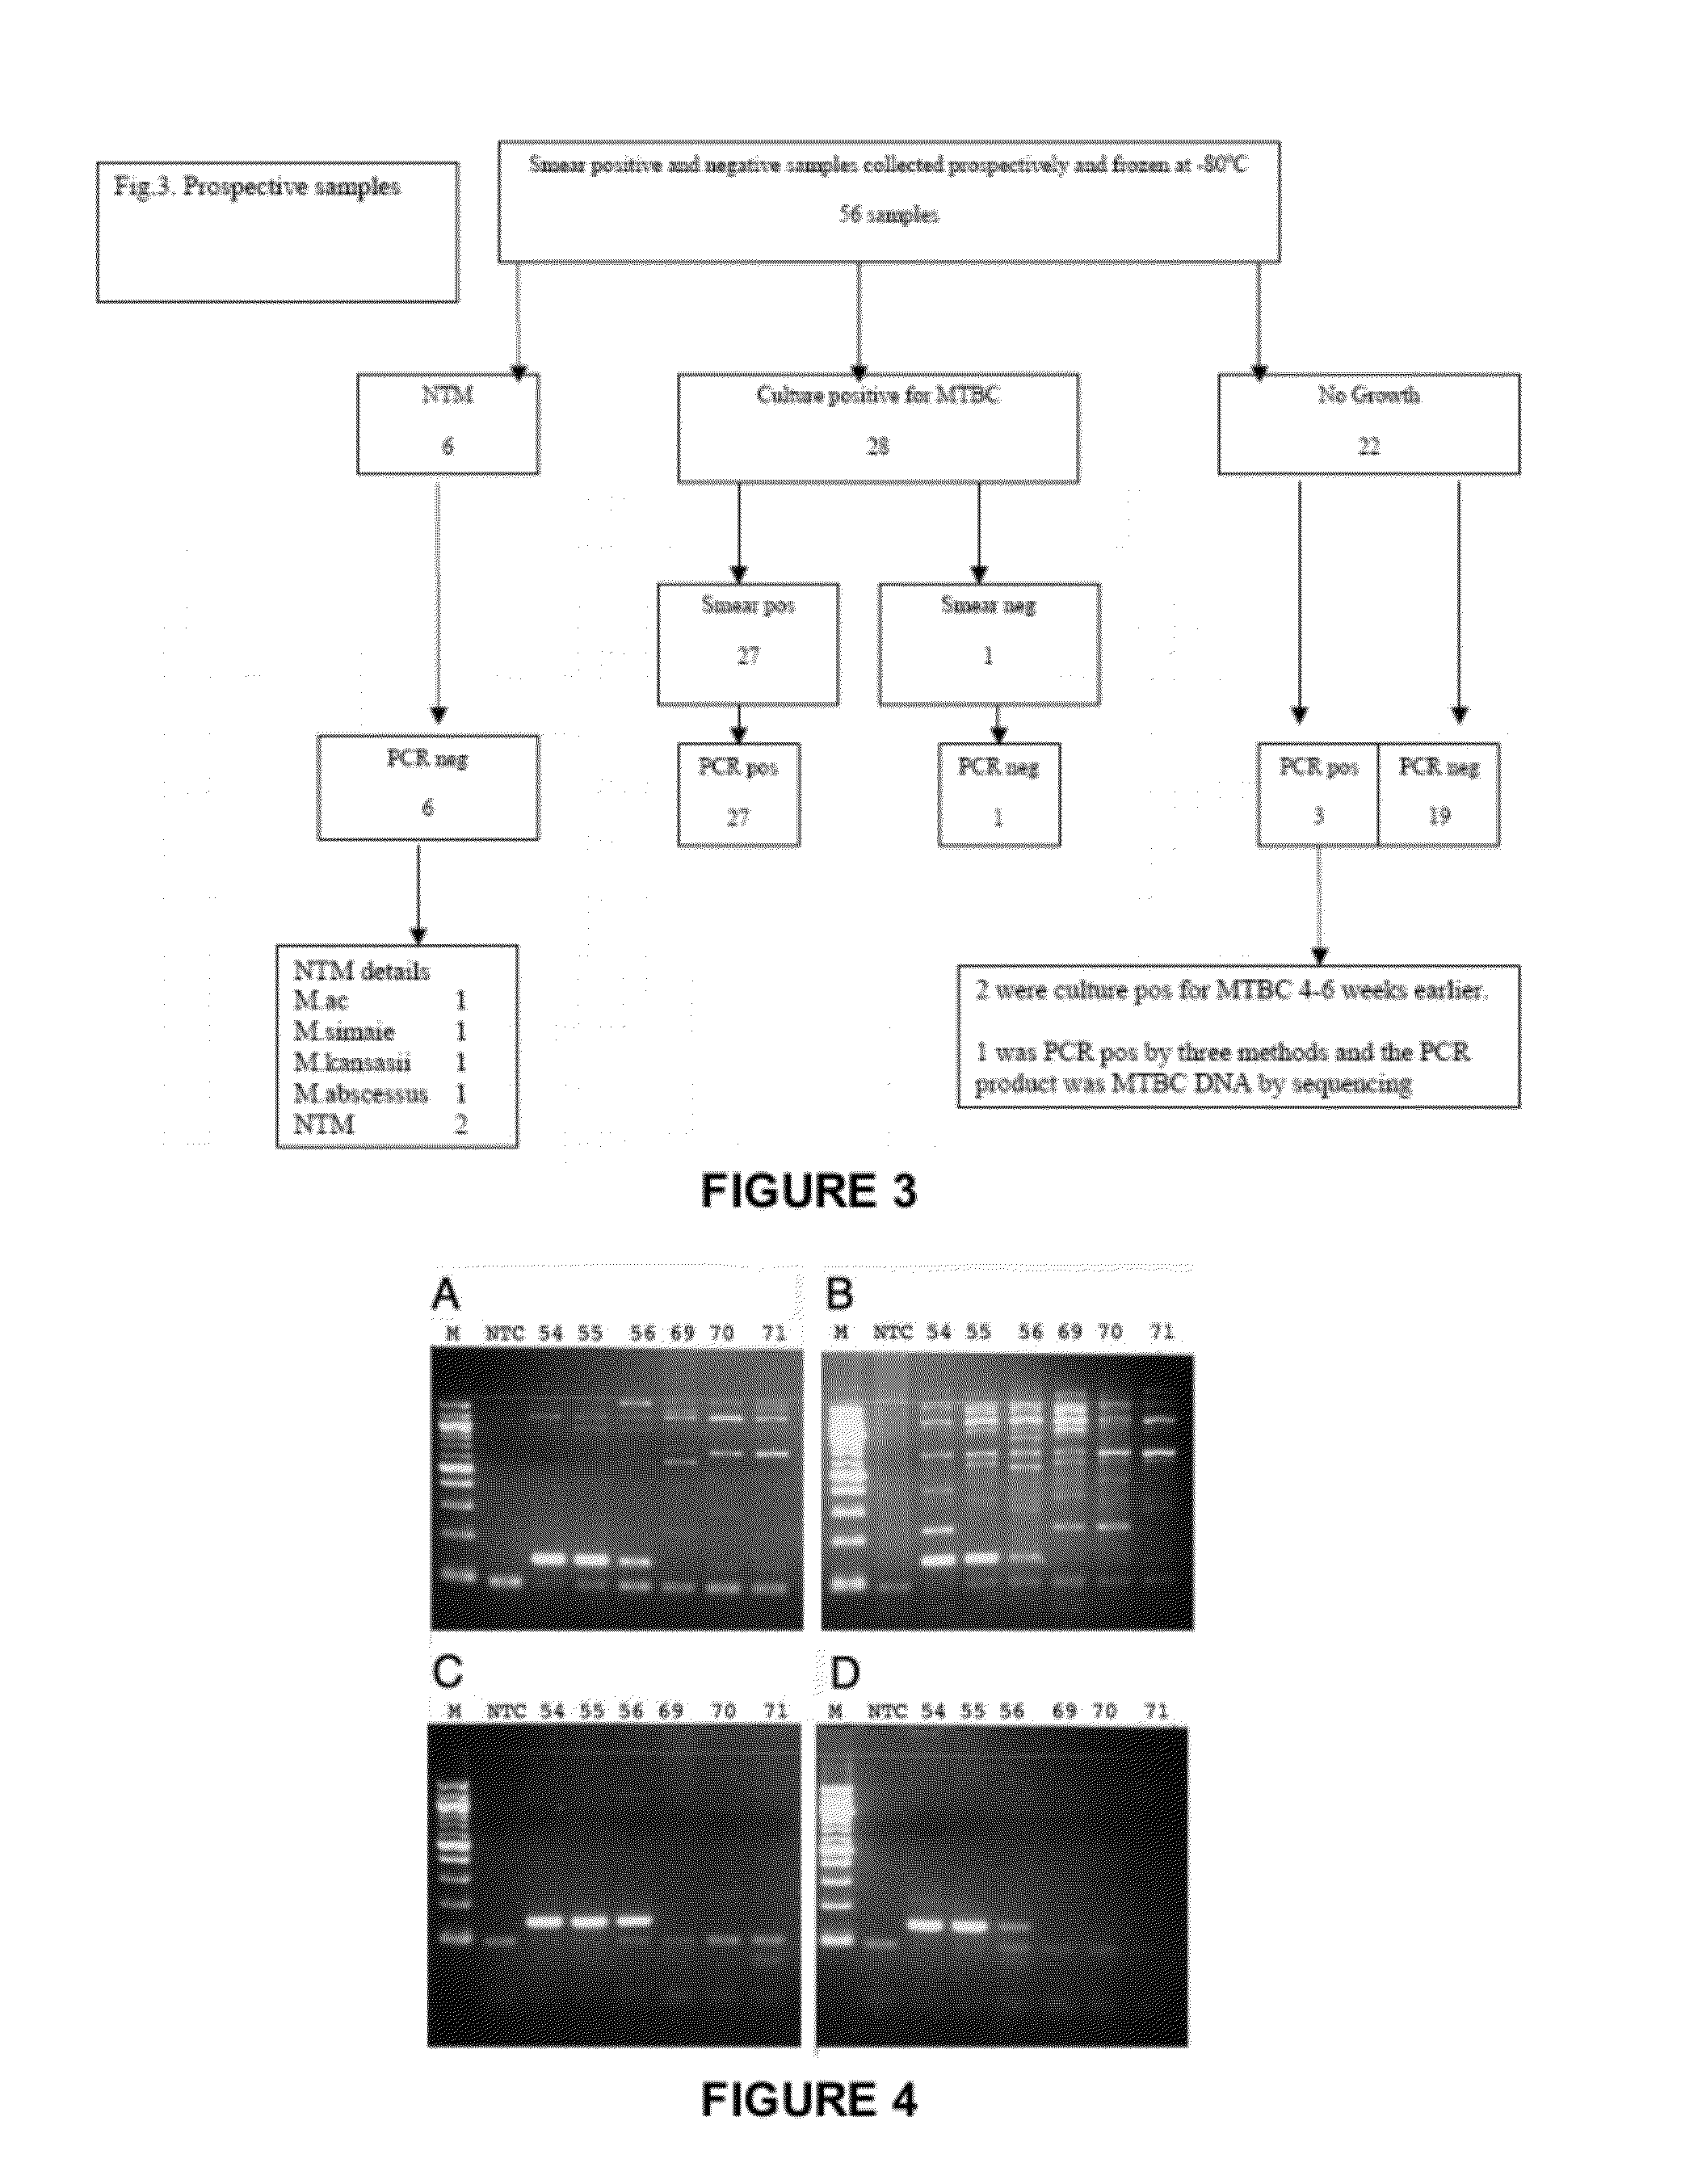 Method and/or primers for the detection of mycobacterium tuberculosis